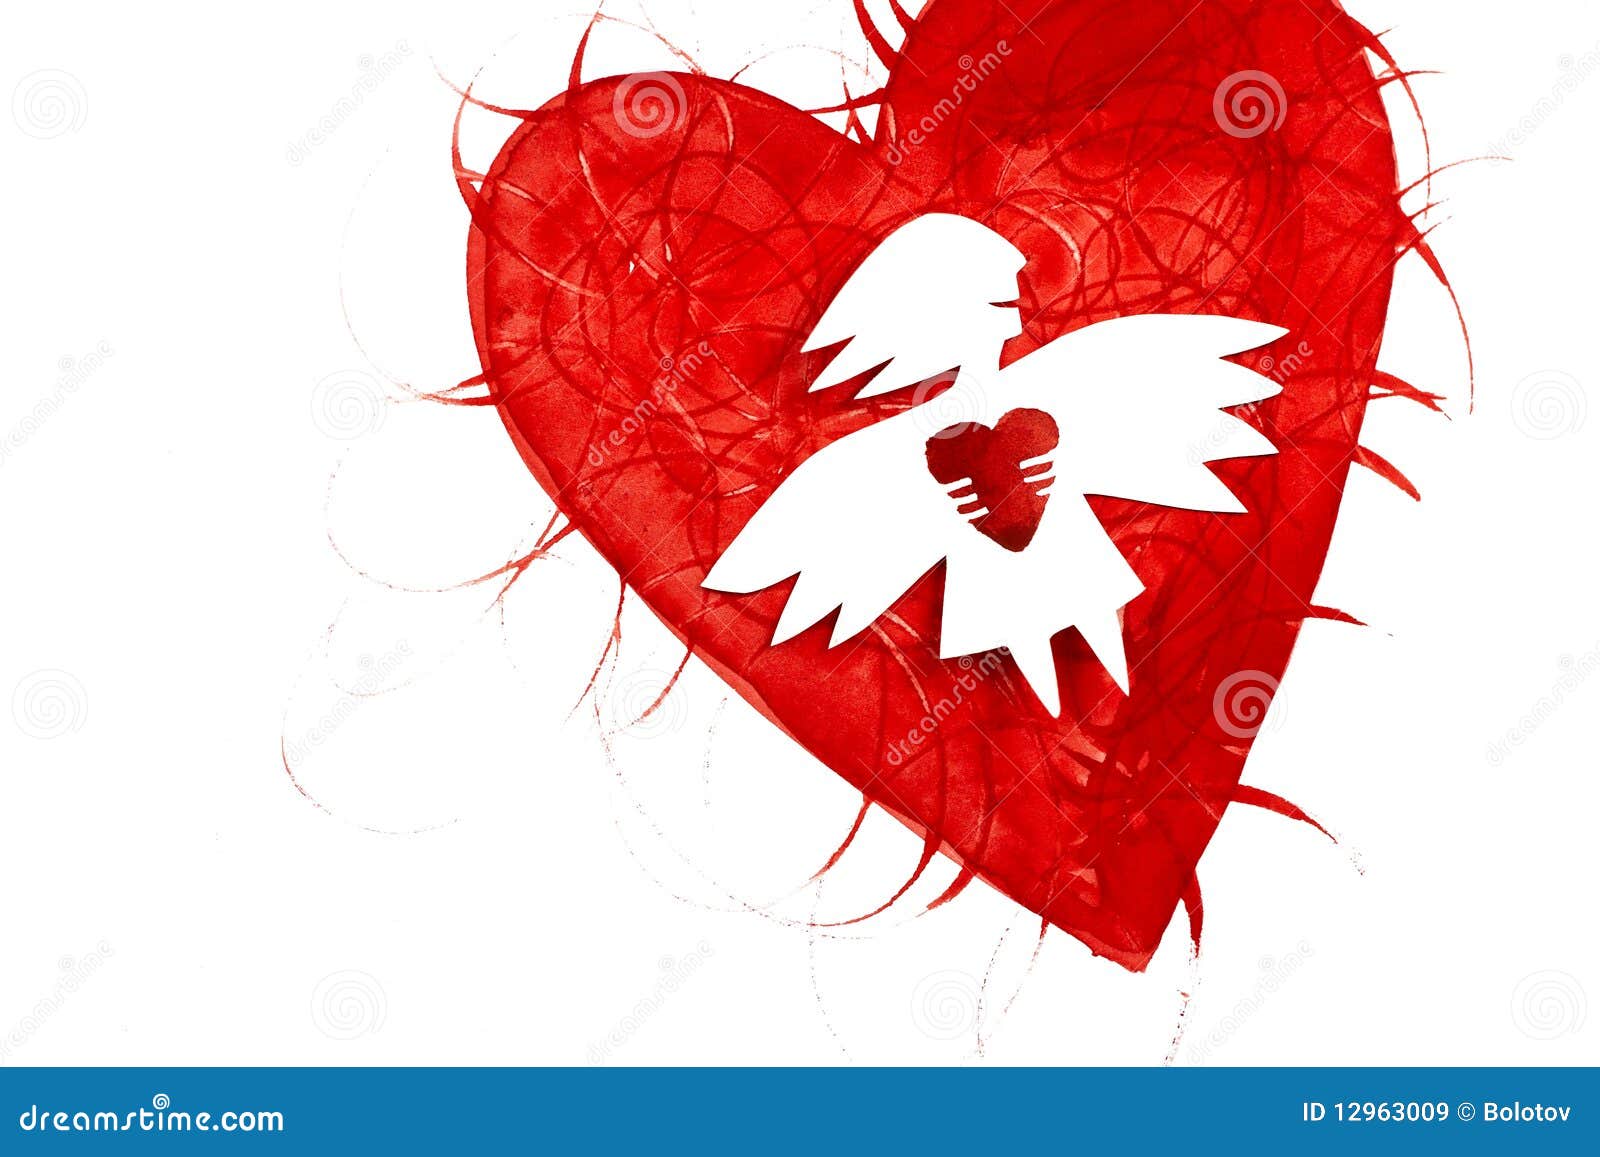 Angel of love with heart stock illustration. Illustration of happiness ...